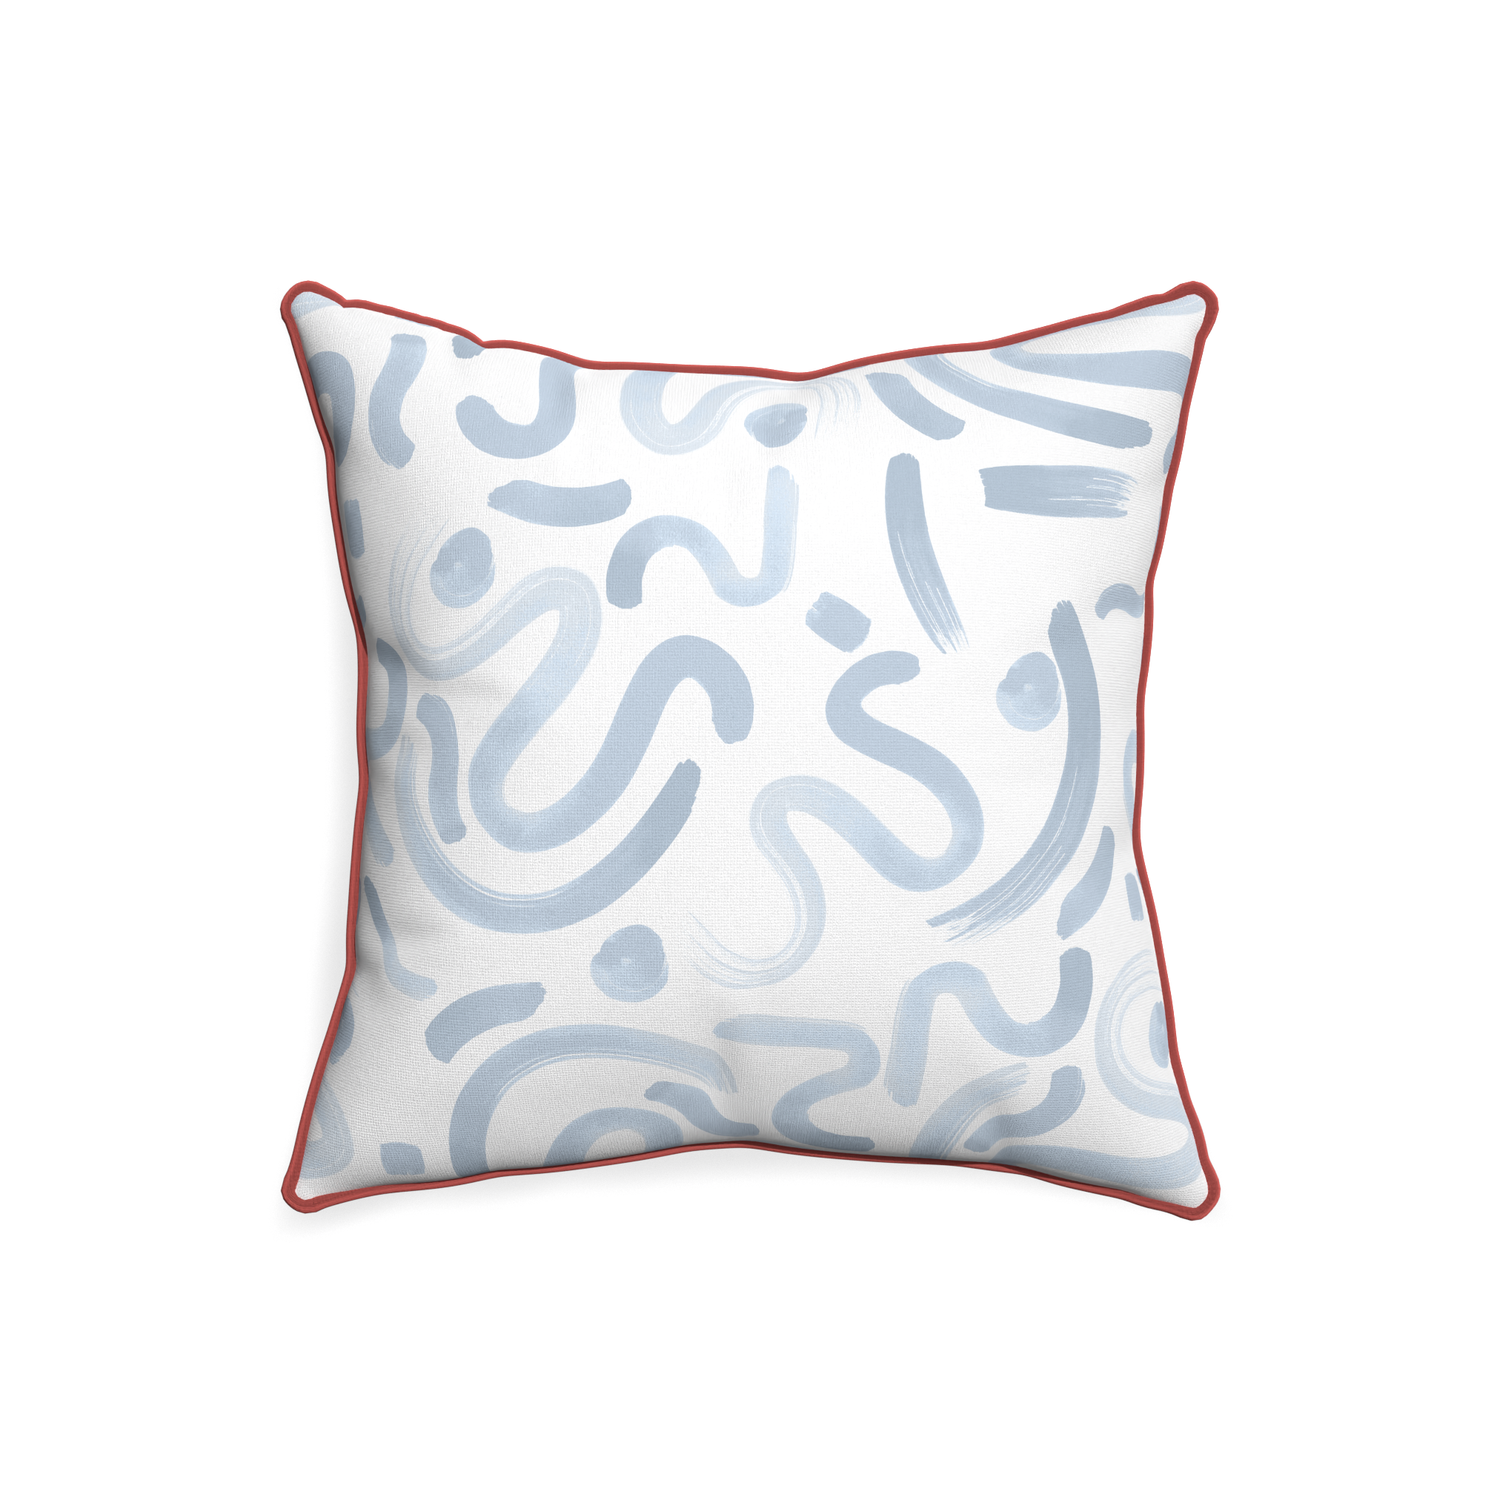 20-square hockney sky custom pillow with c piping on white background